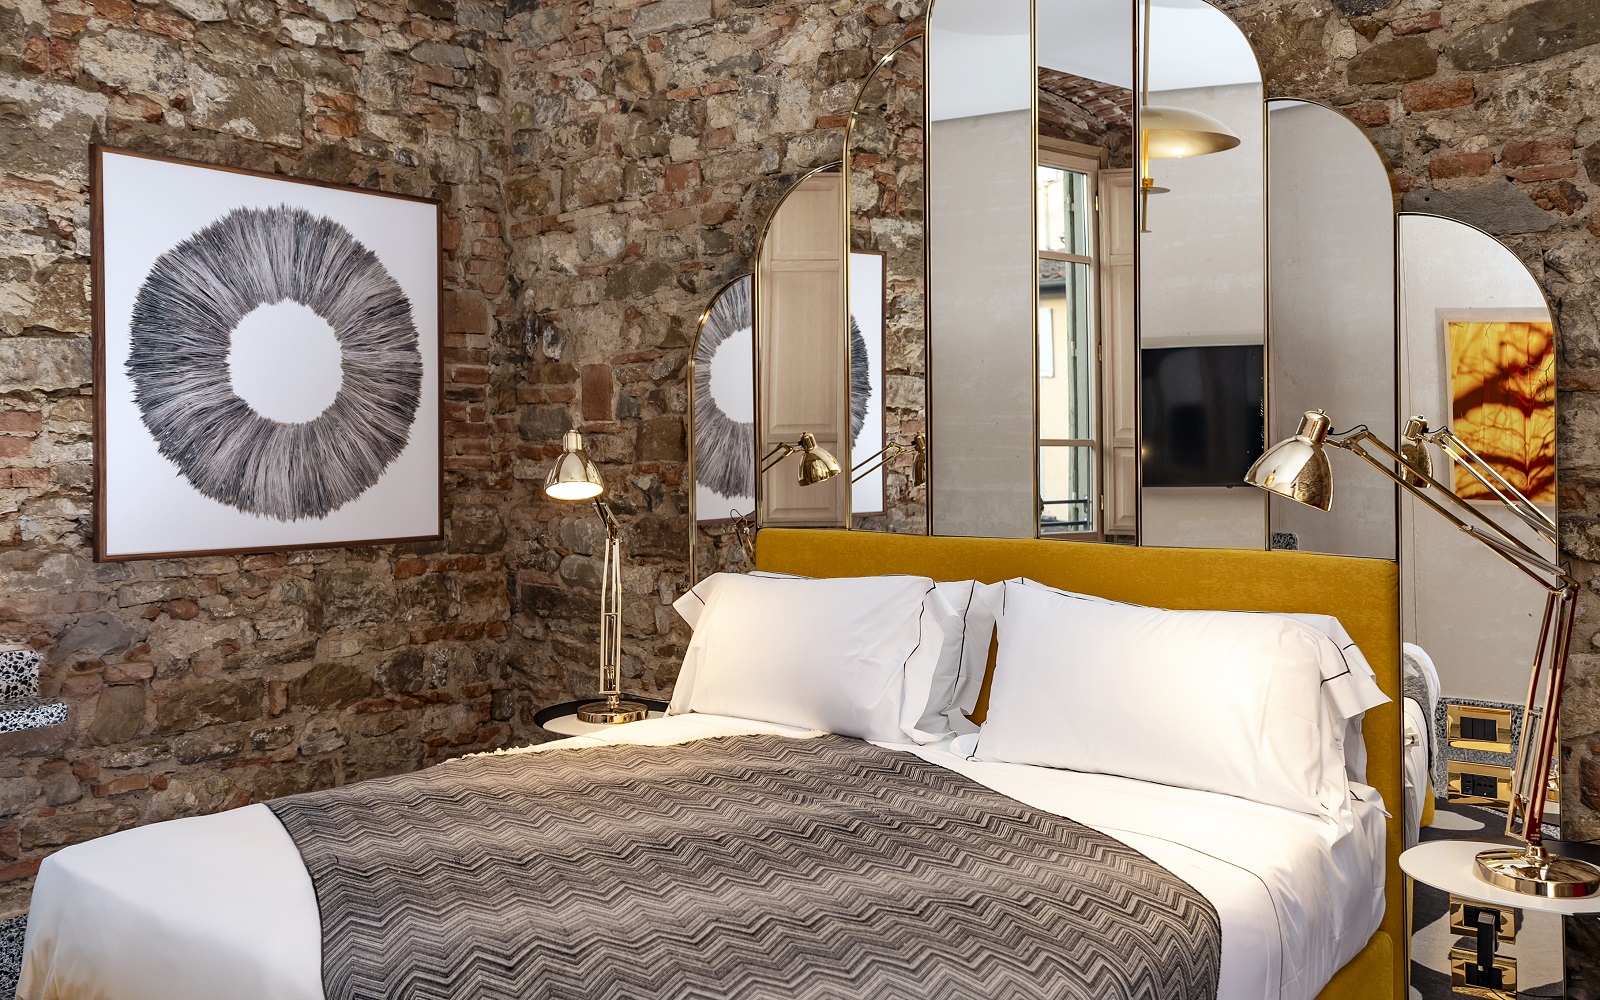 mirrored headboard in guestroom contrasting with stone walls